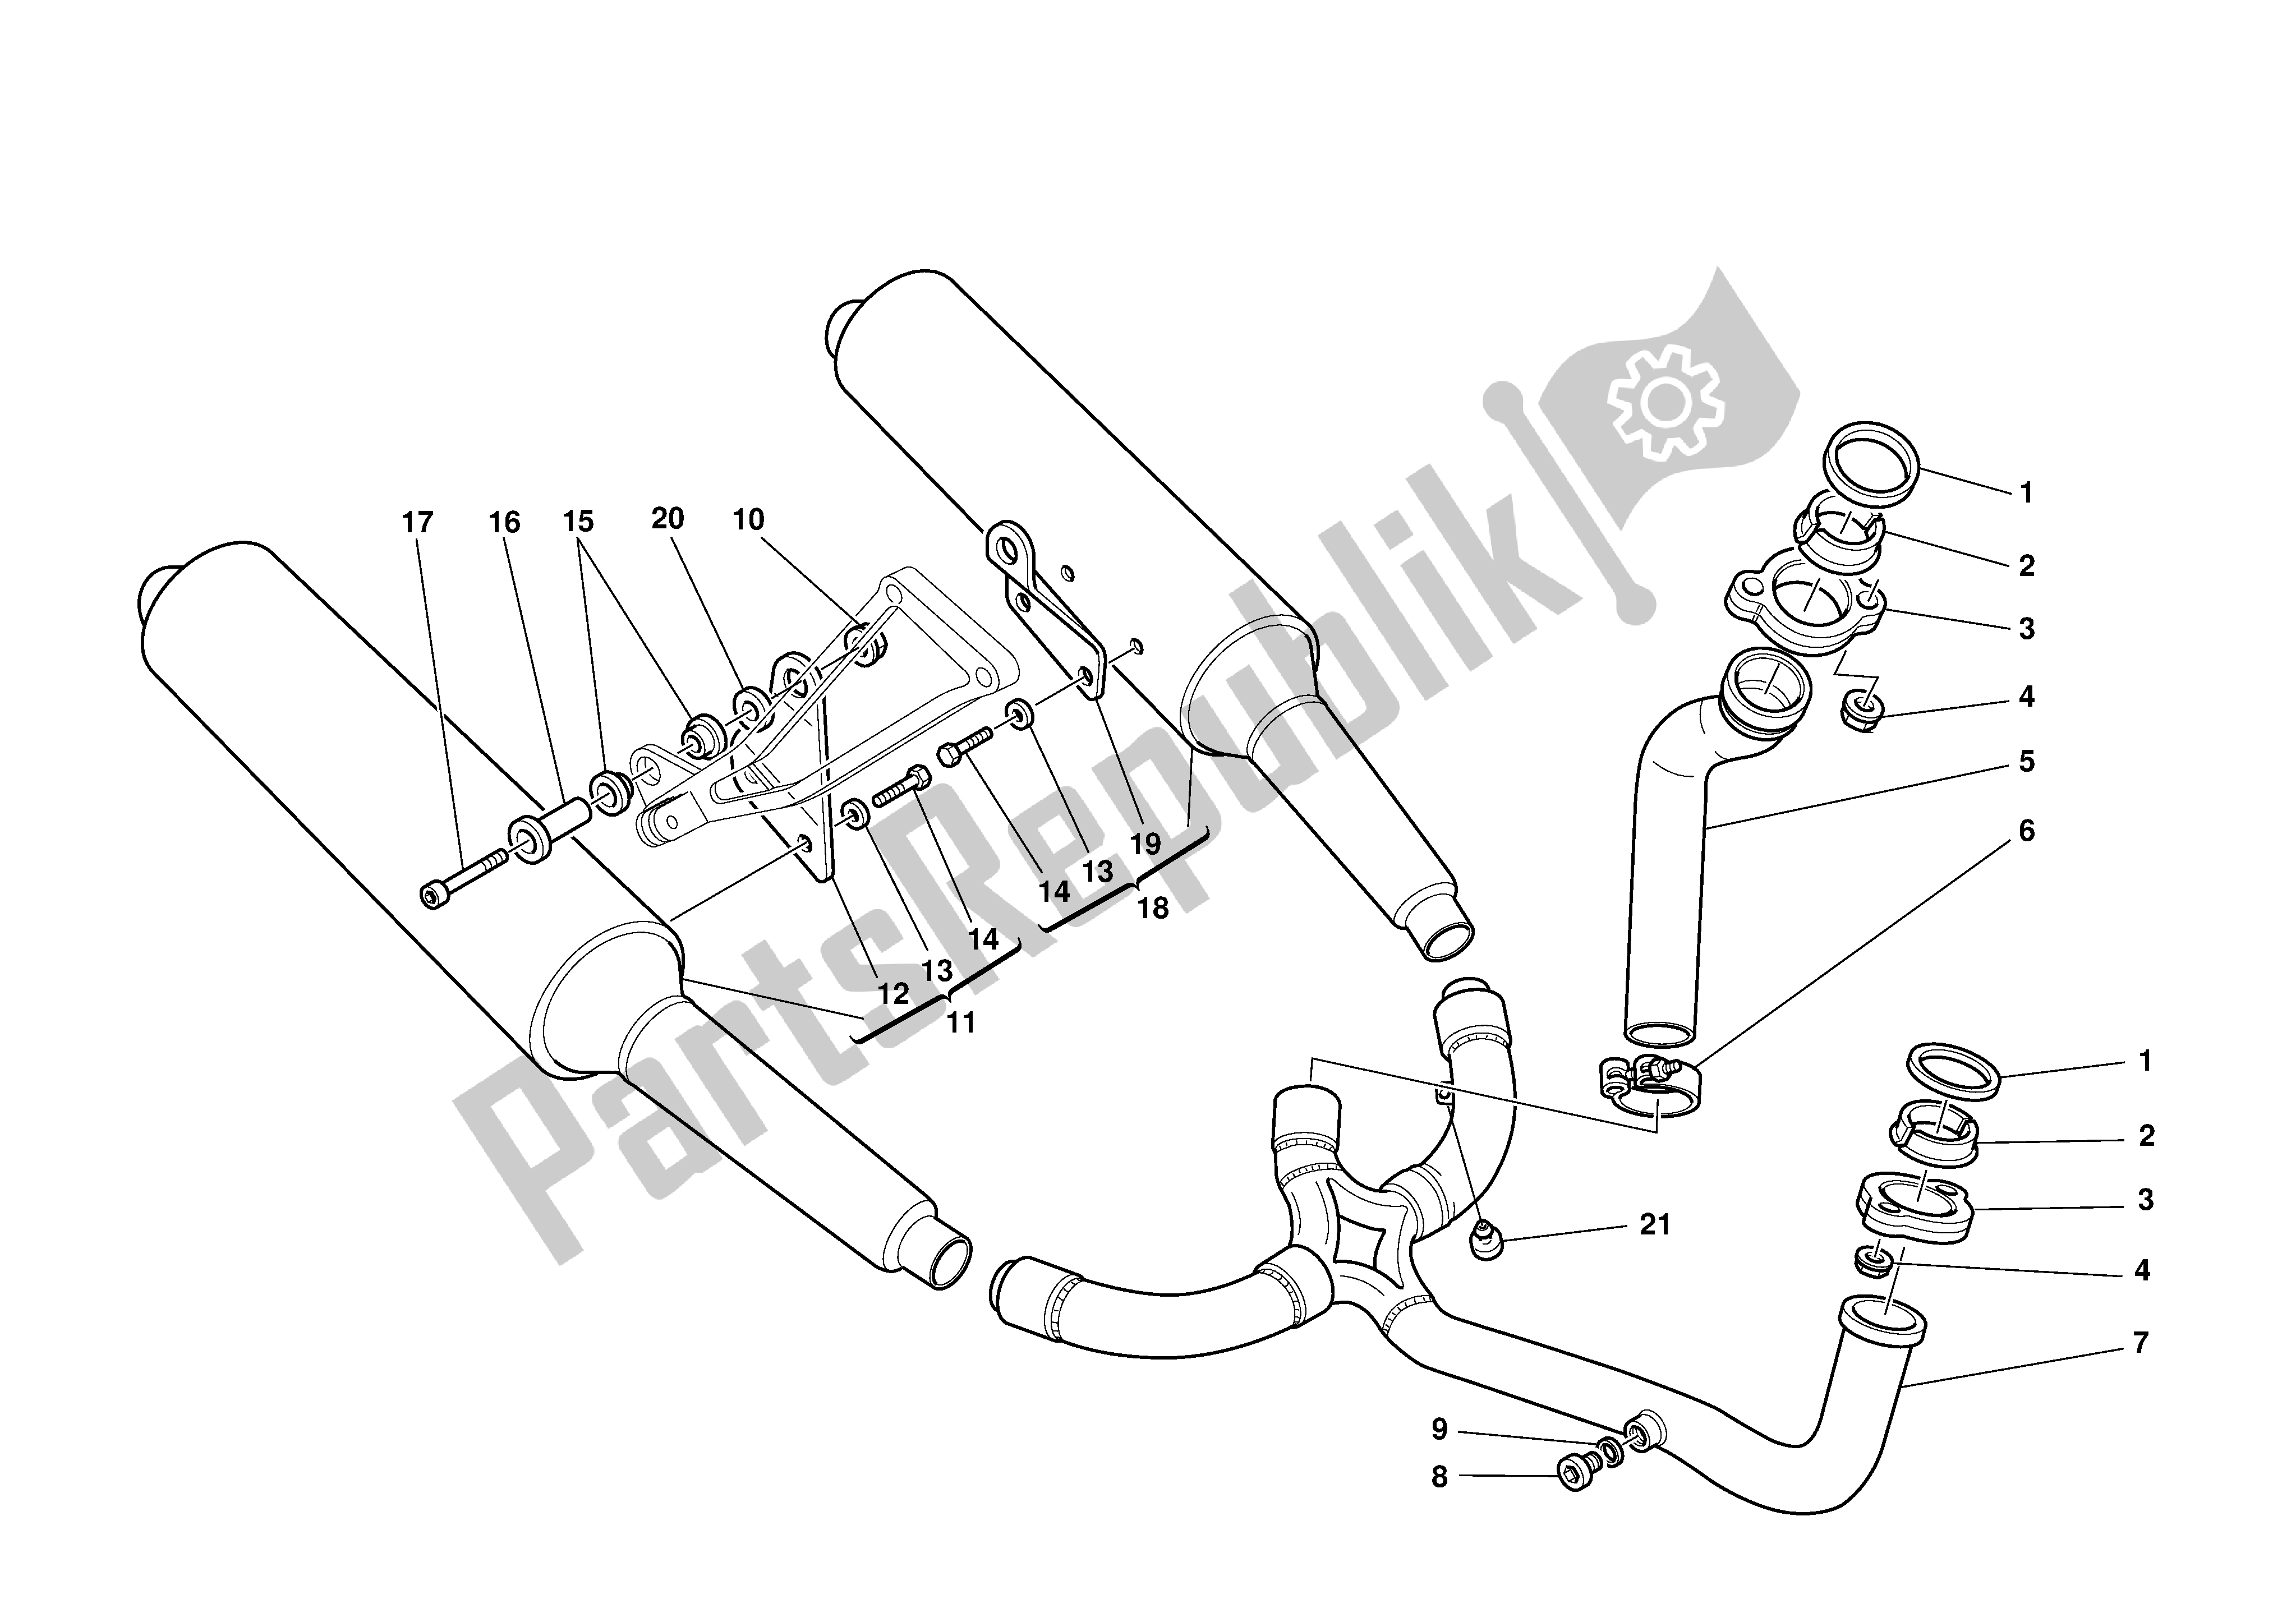 All parts for the Exhaust System of the Ducati Supersport 800 2003